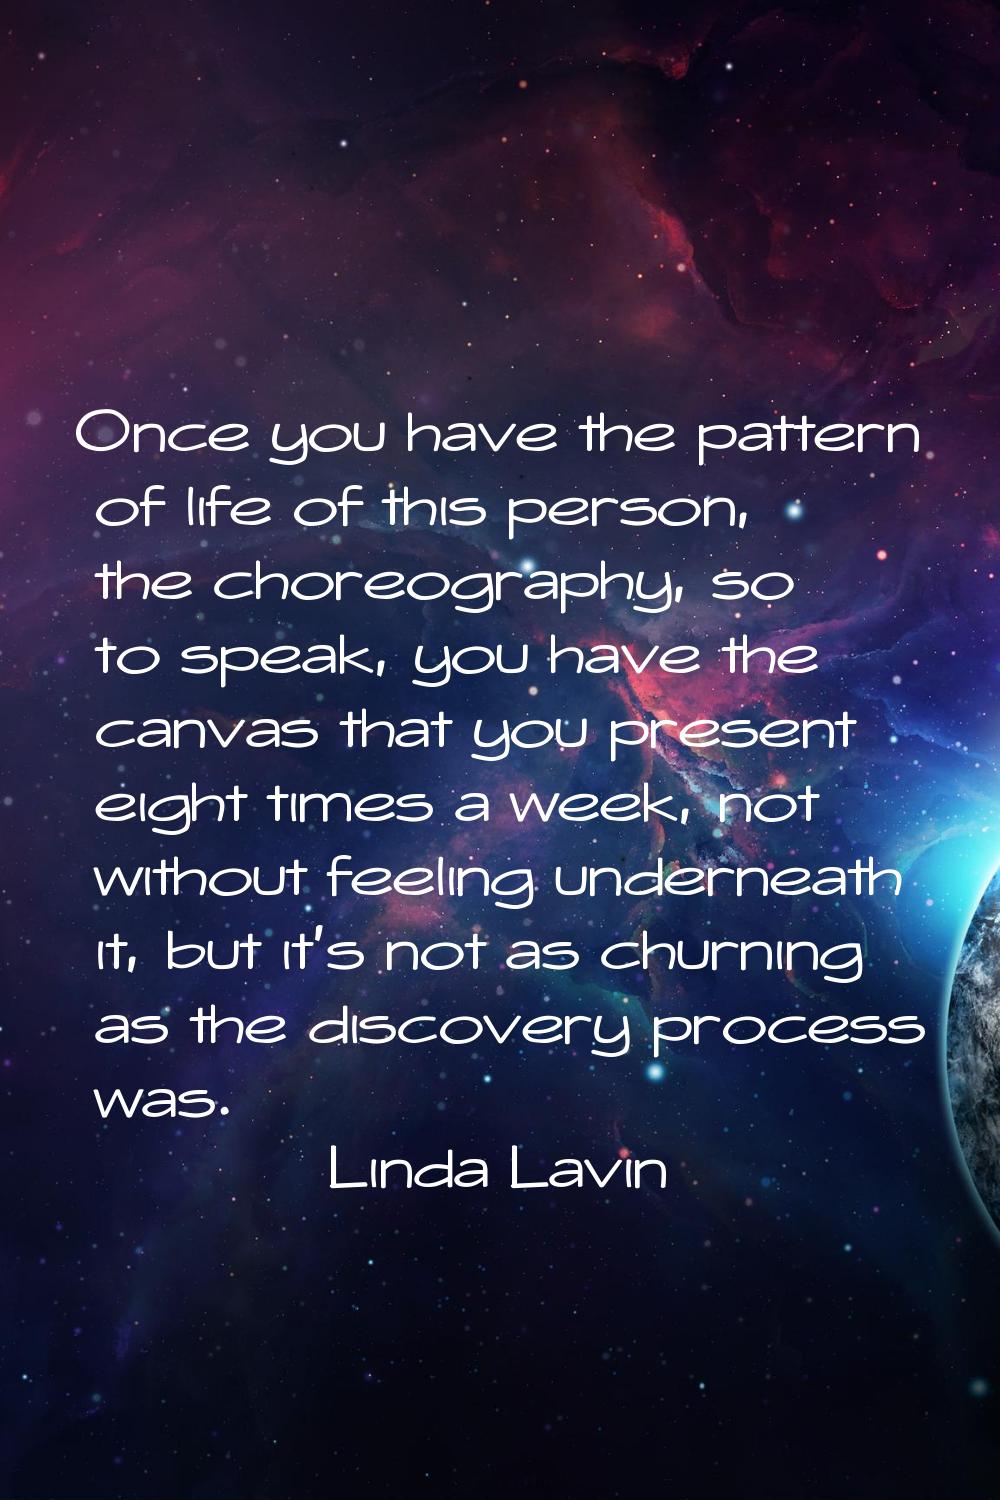 Once you have the pattern of life of this person, the choreography, so to speak, you have the canva